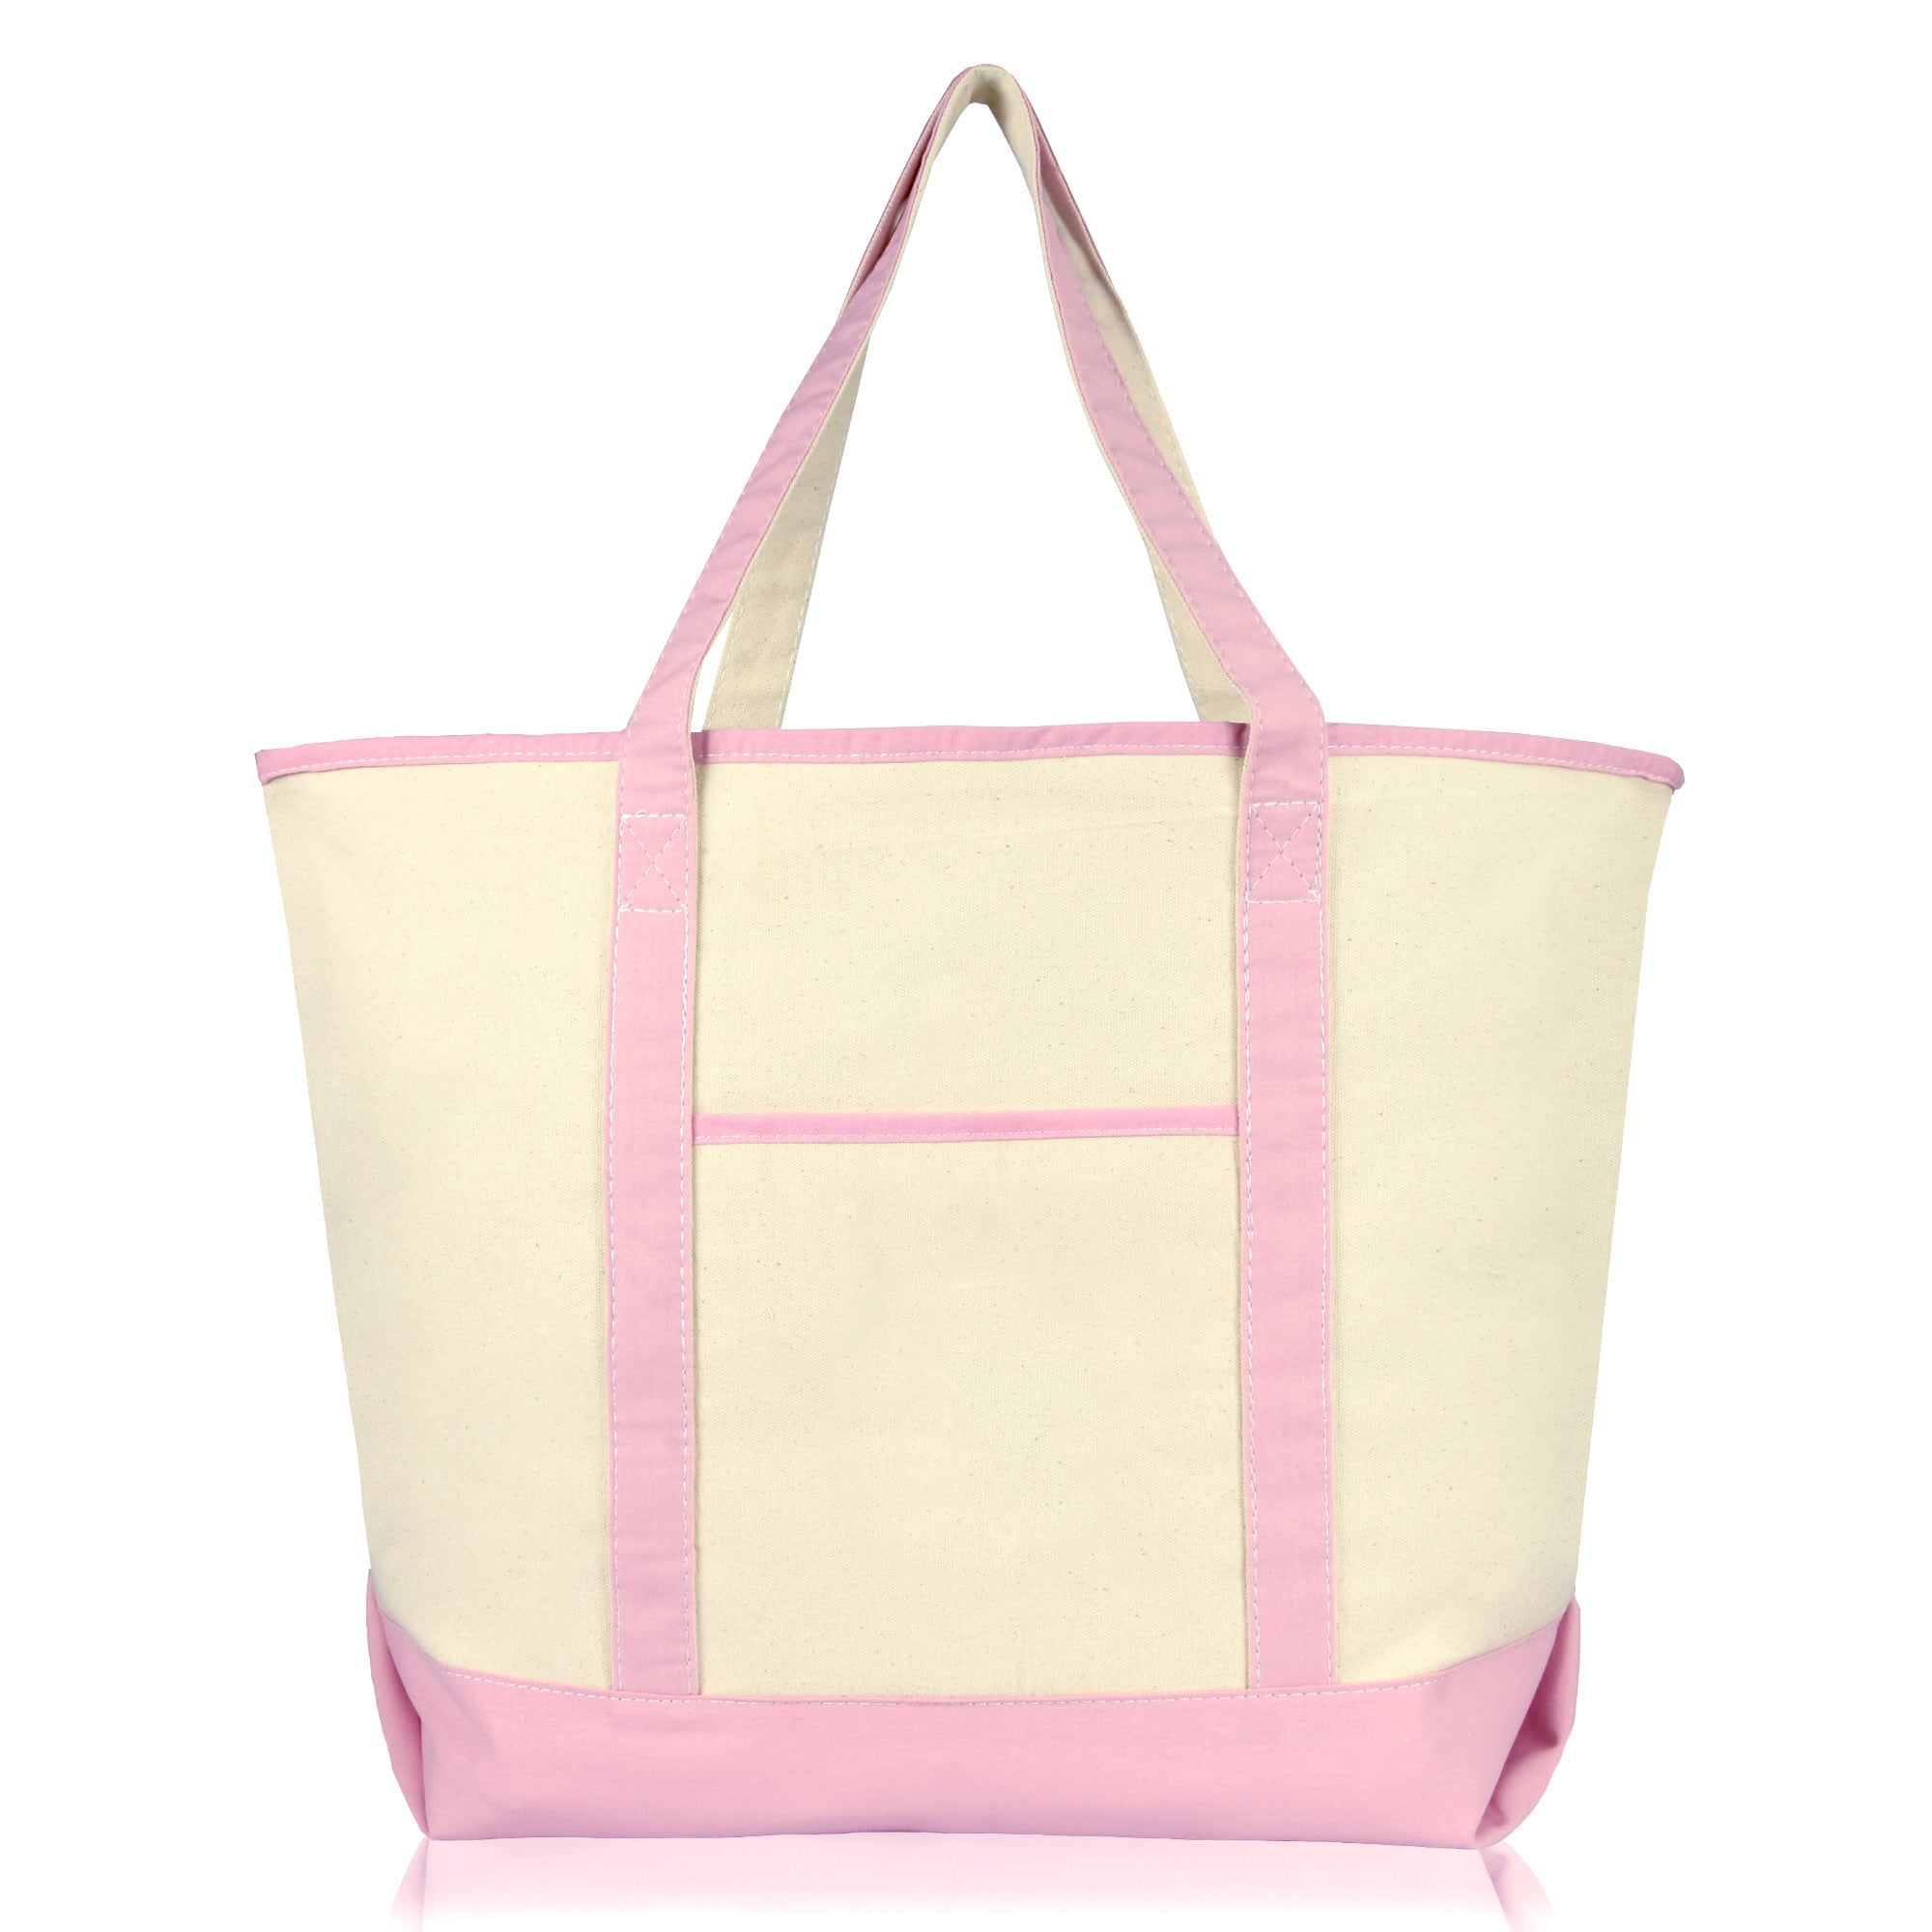 DALIX 22" Open Top Deluxe Tote Bag with Outer Pocket in Pink